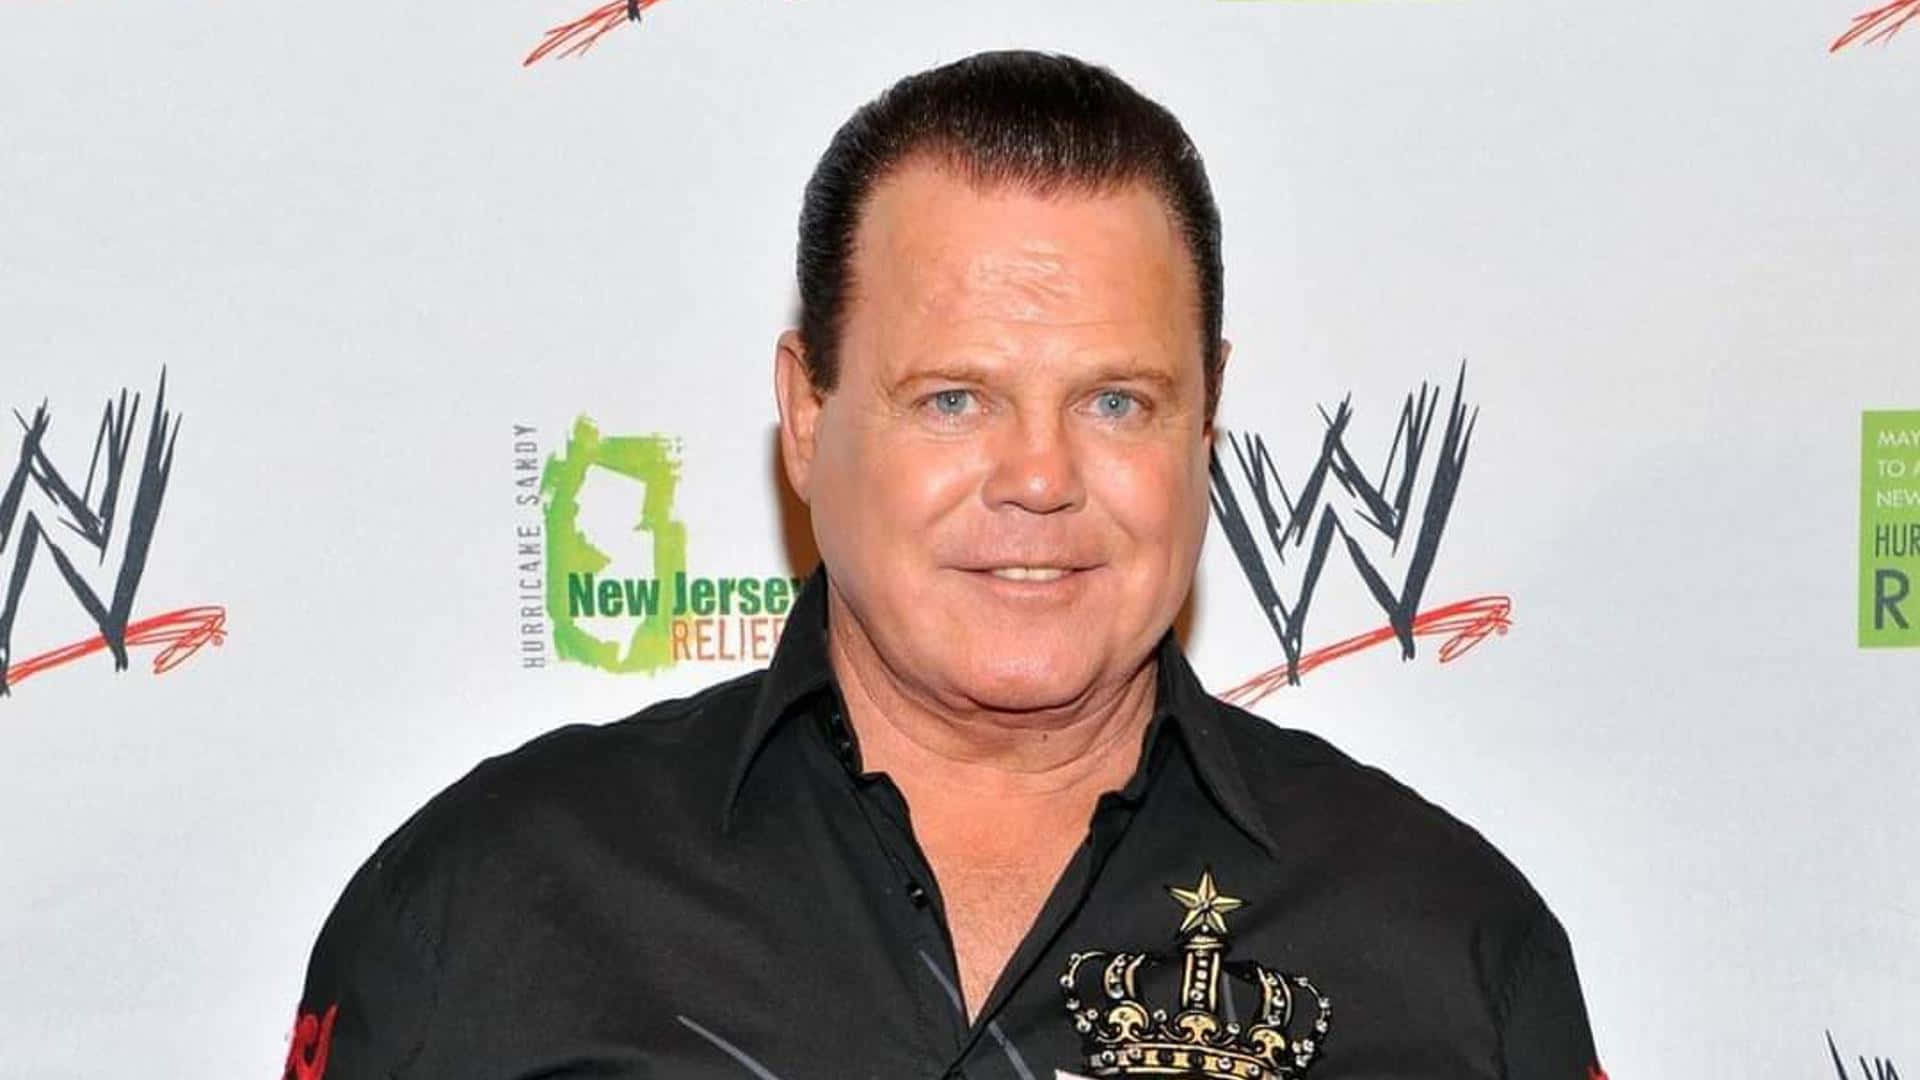 Jerry Lawler At Sandy Relief Event 2013 Wallpaper